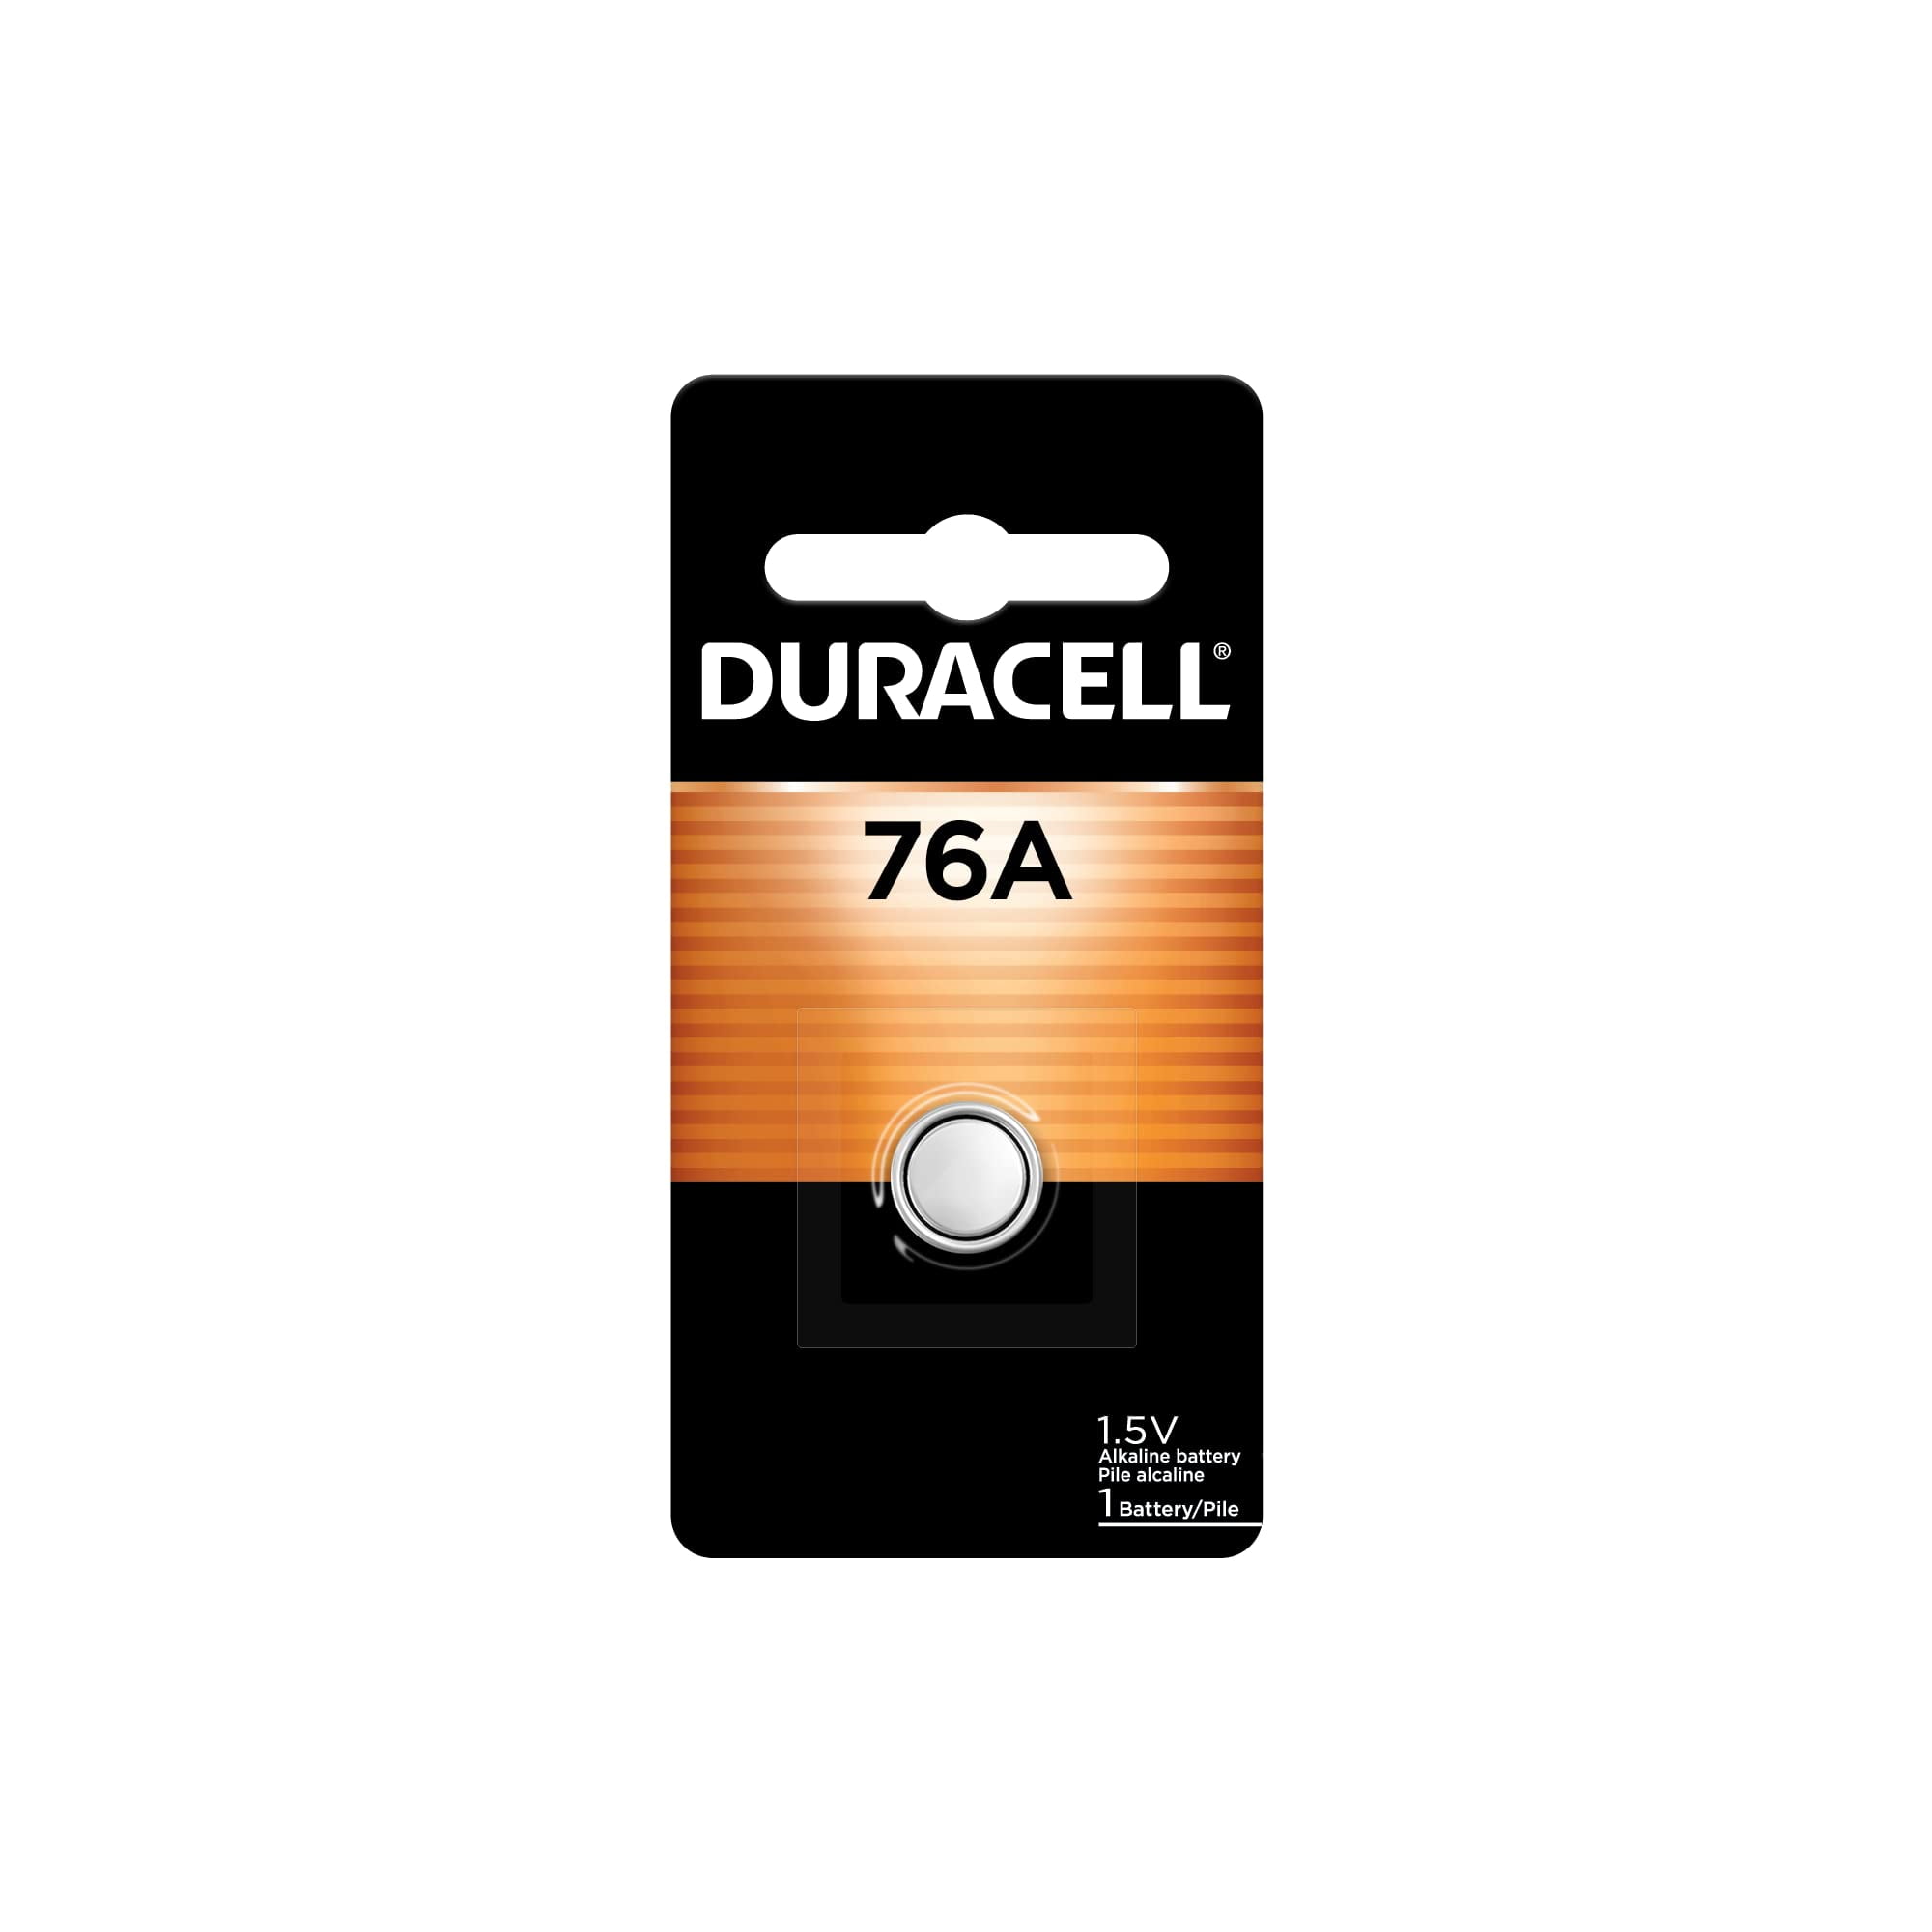 Duracell 76A 1.5V Alkaline Battery Compatible with LR44, CR44, SR44, AG13,  A76 